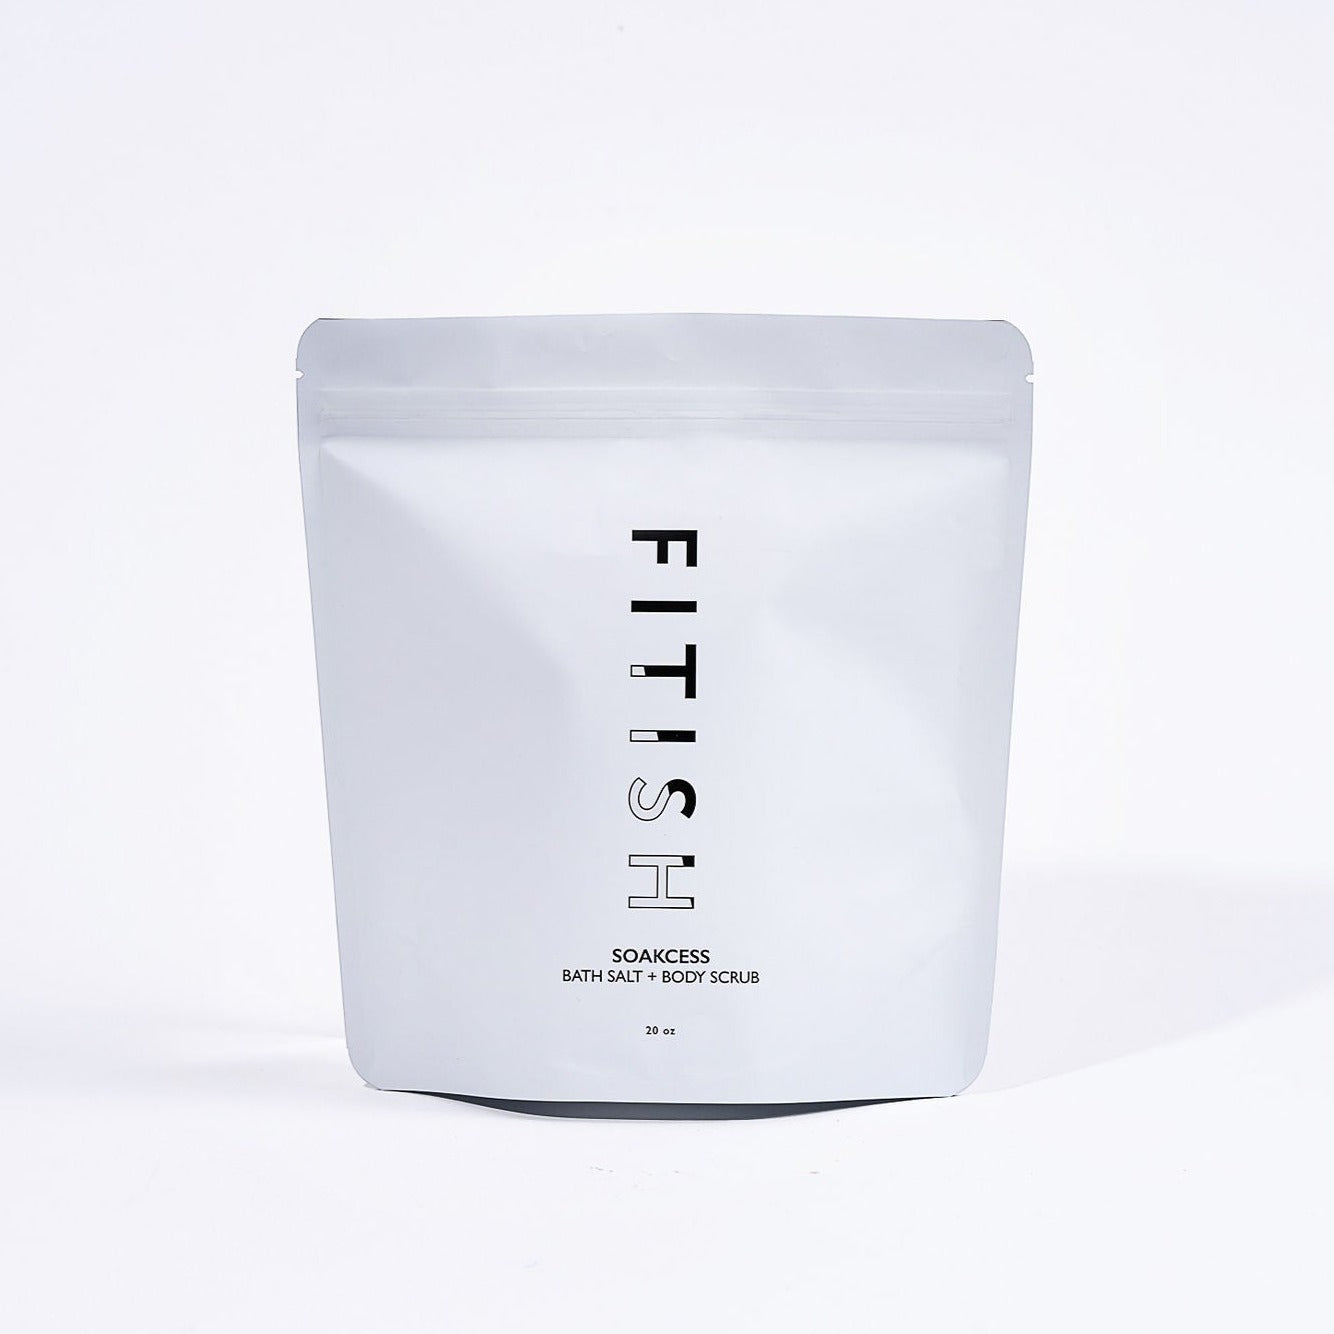 fitish soakcess epsom bath salts dry skin skin dry skin skin for dry skin dry skin dry skin a dry skin dry skin skin dry skin and dry skin dry skin that is dry xerosis skin scaly skin skin type flaky skin ashy skin best beauty shop oily face mature skin rough skin skin mature dry patches chapped skin before and after skincare beauty &amp; beauty before after skincare an skin beauty type beauty beauty type